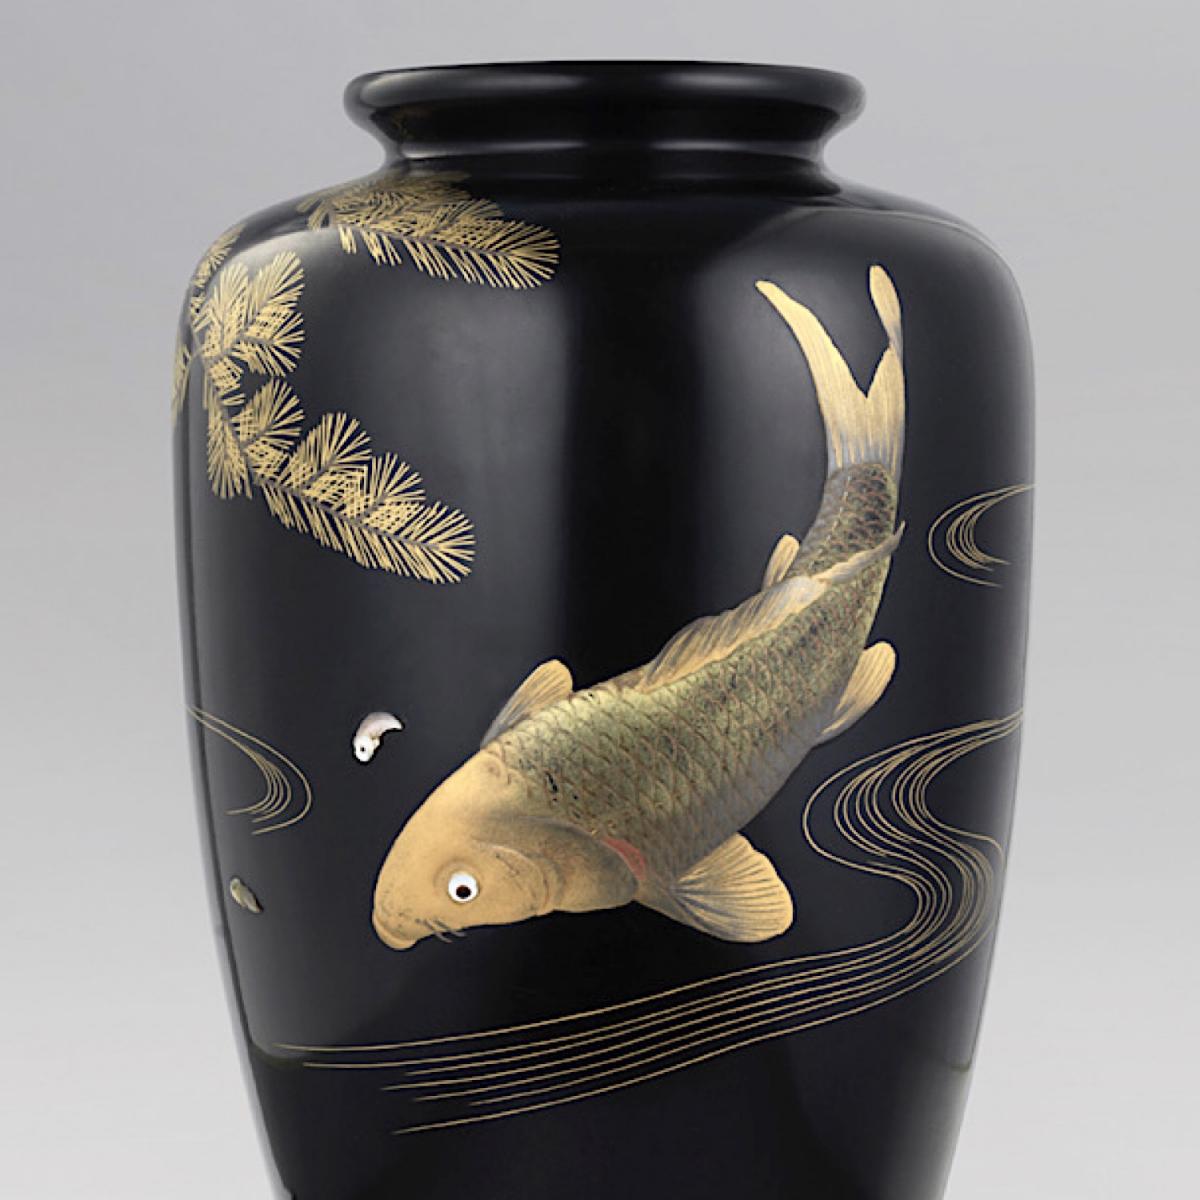 Japanese lacquer vase decorated with a koi carp | BADA